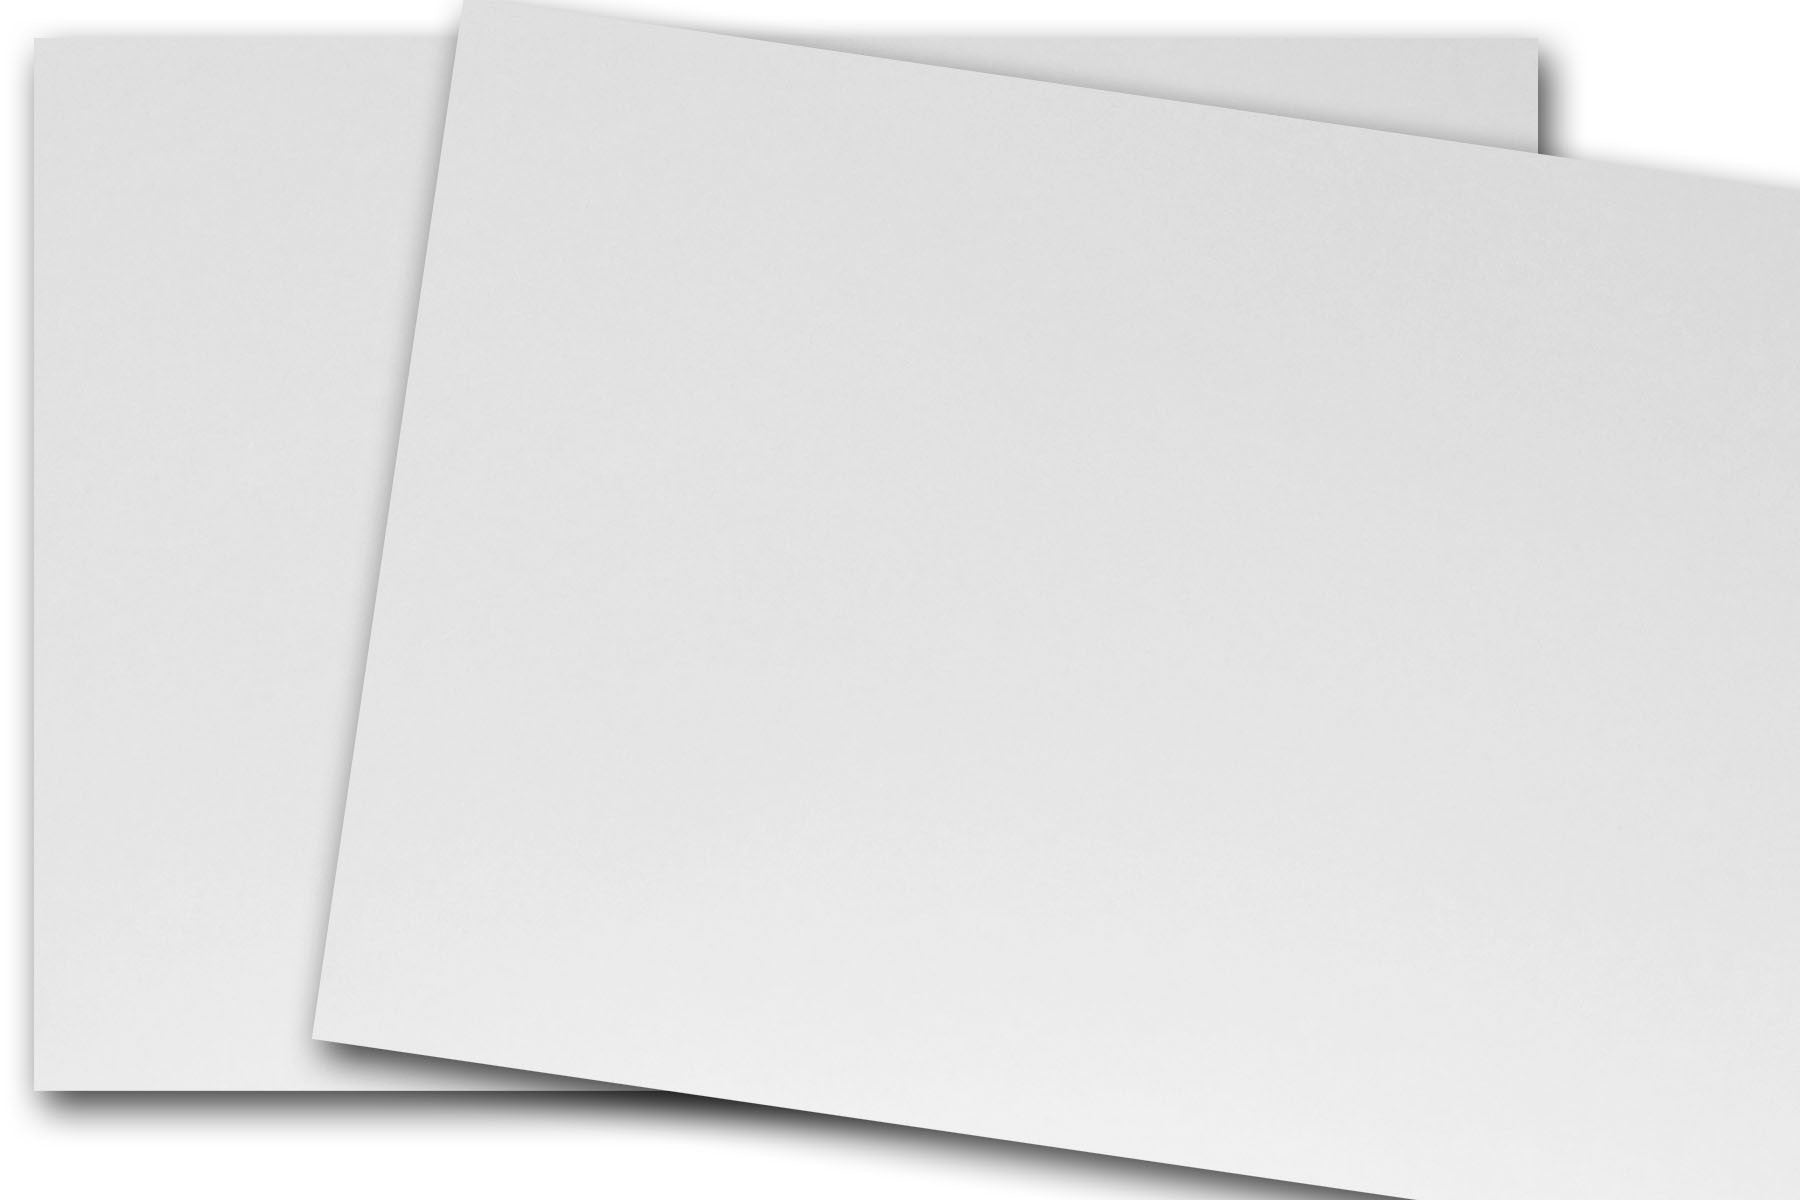 CLASSIC CREST Solar White Card Stock - 8 1/2 x 11 in 110 lb Cover Smooth  125 per Package